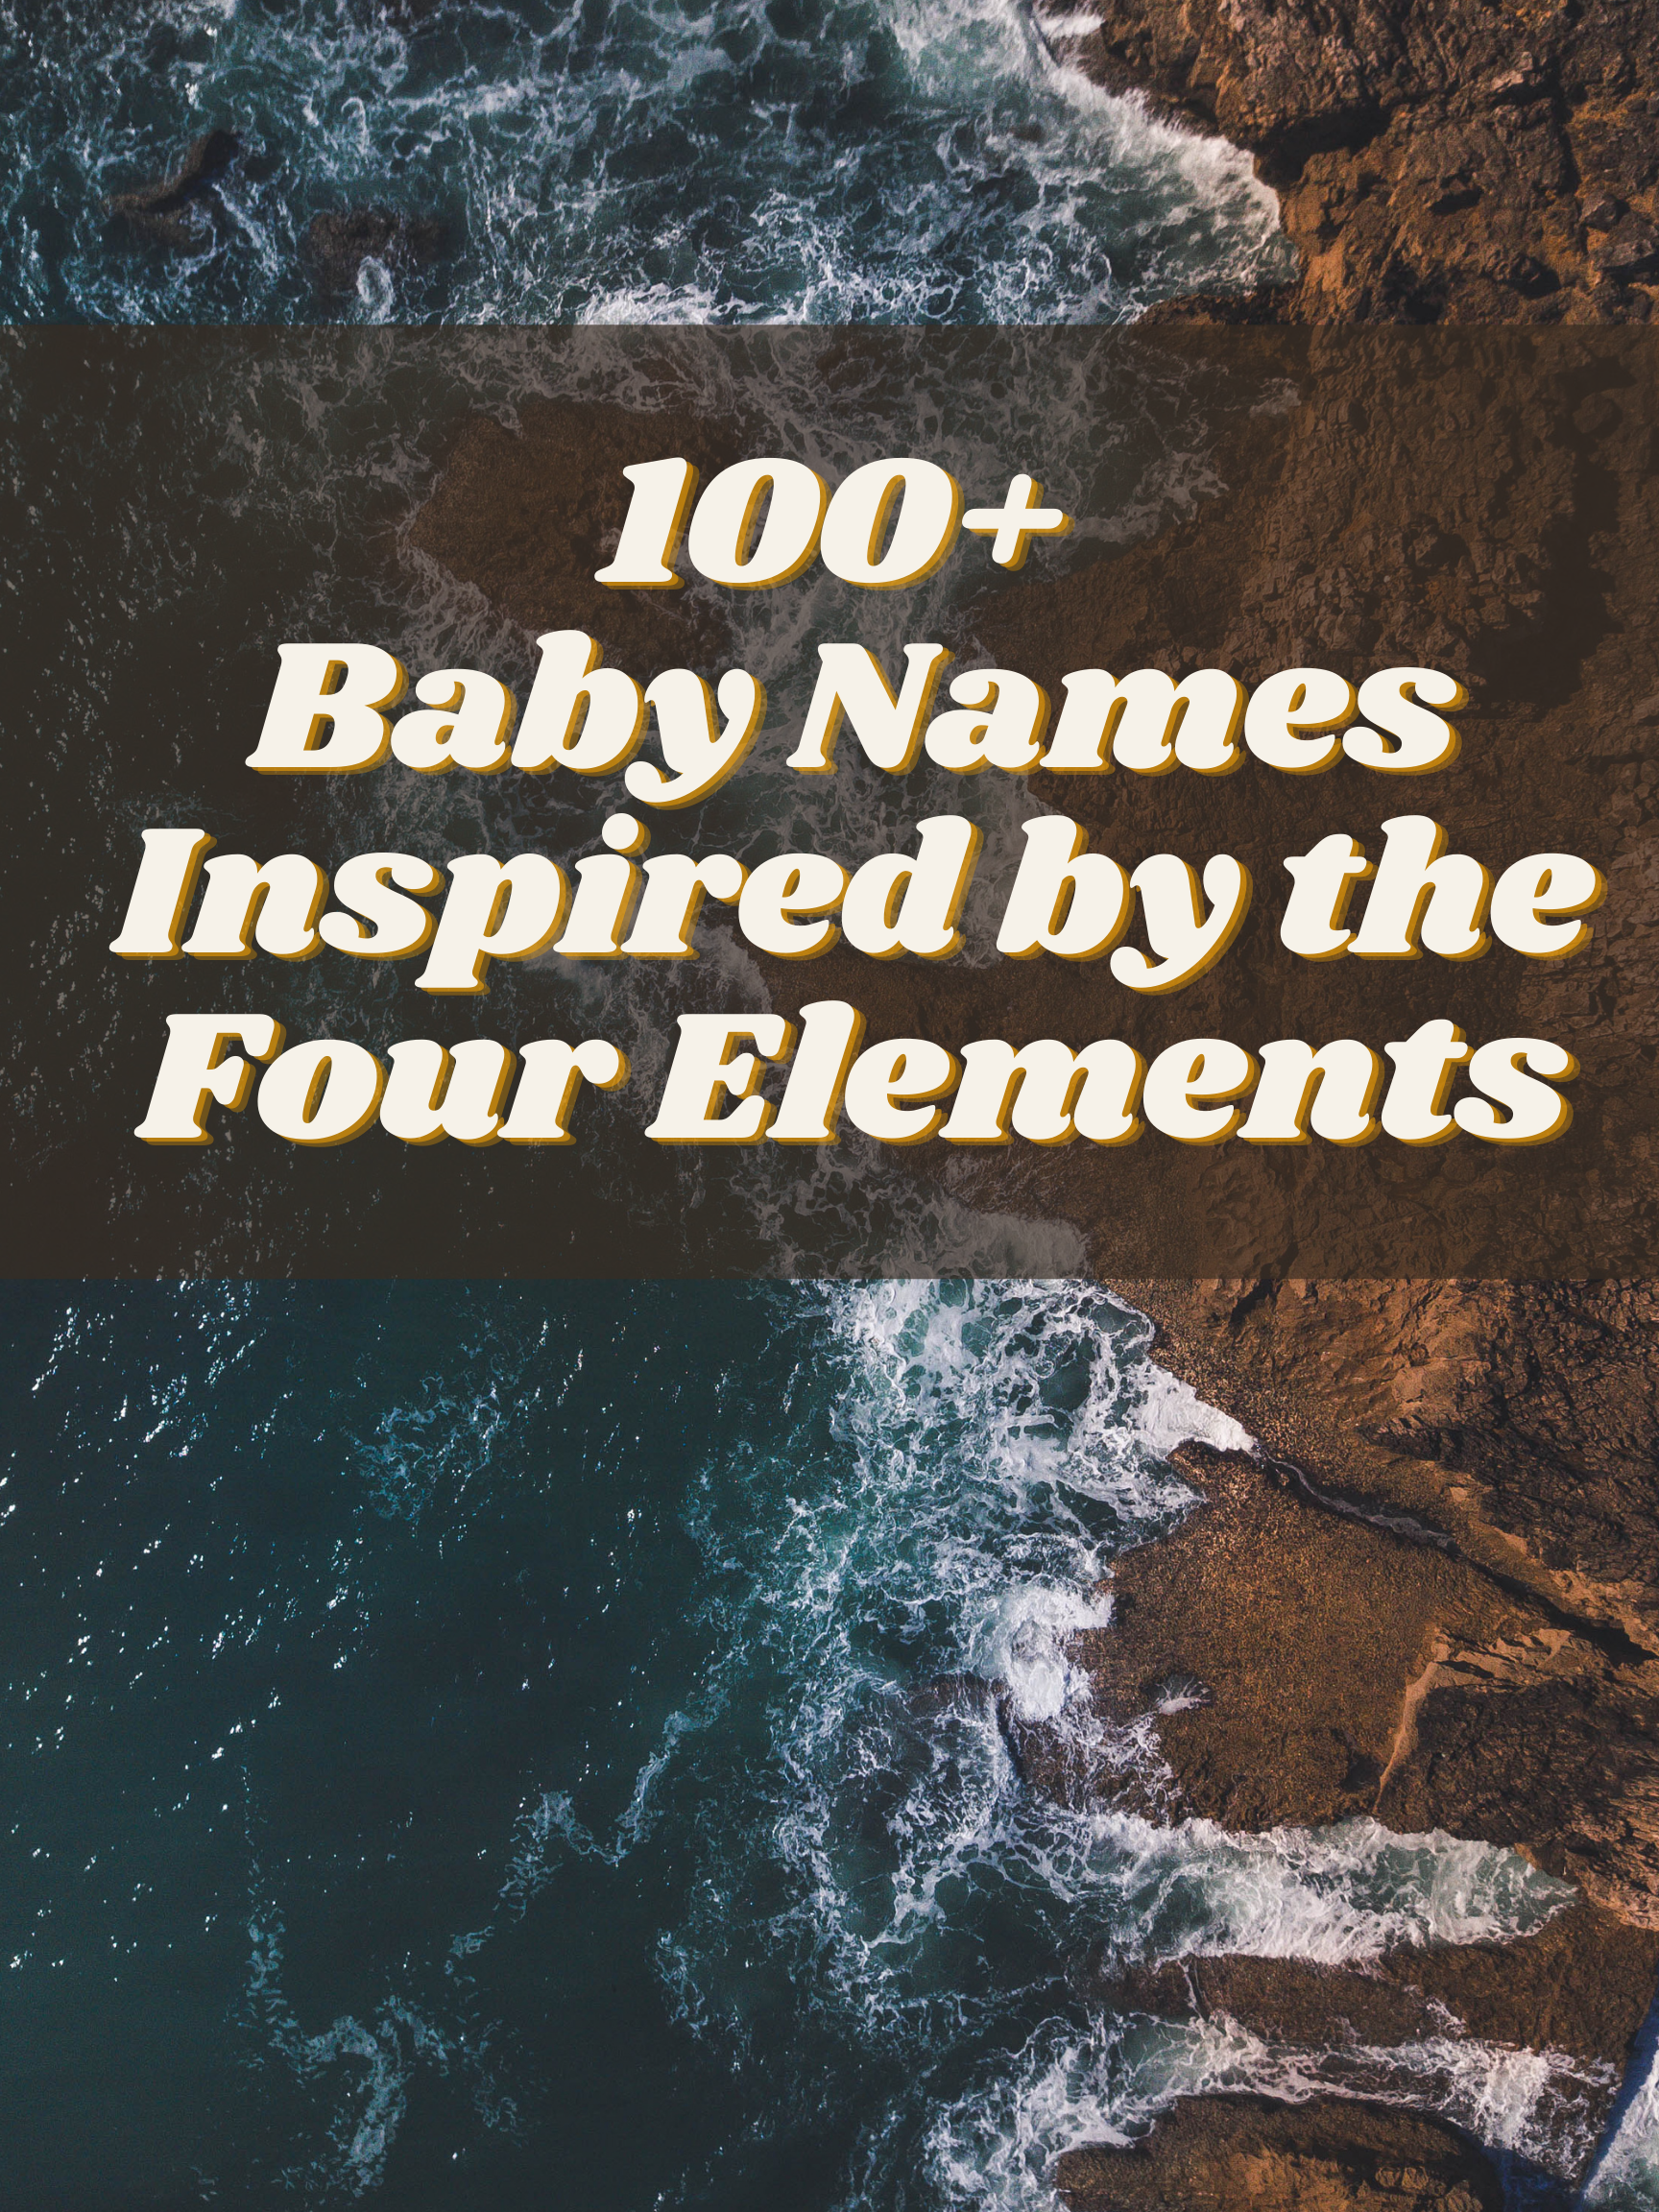 100+ Baby Names Inspired by the Elements